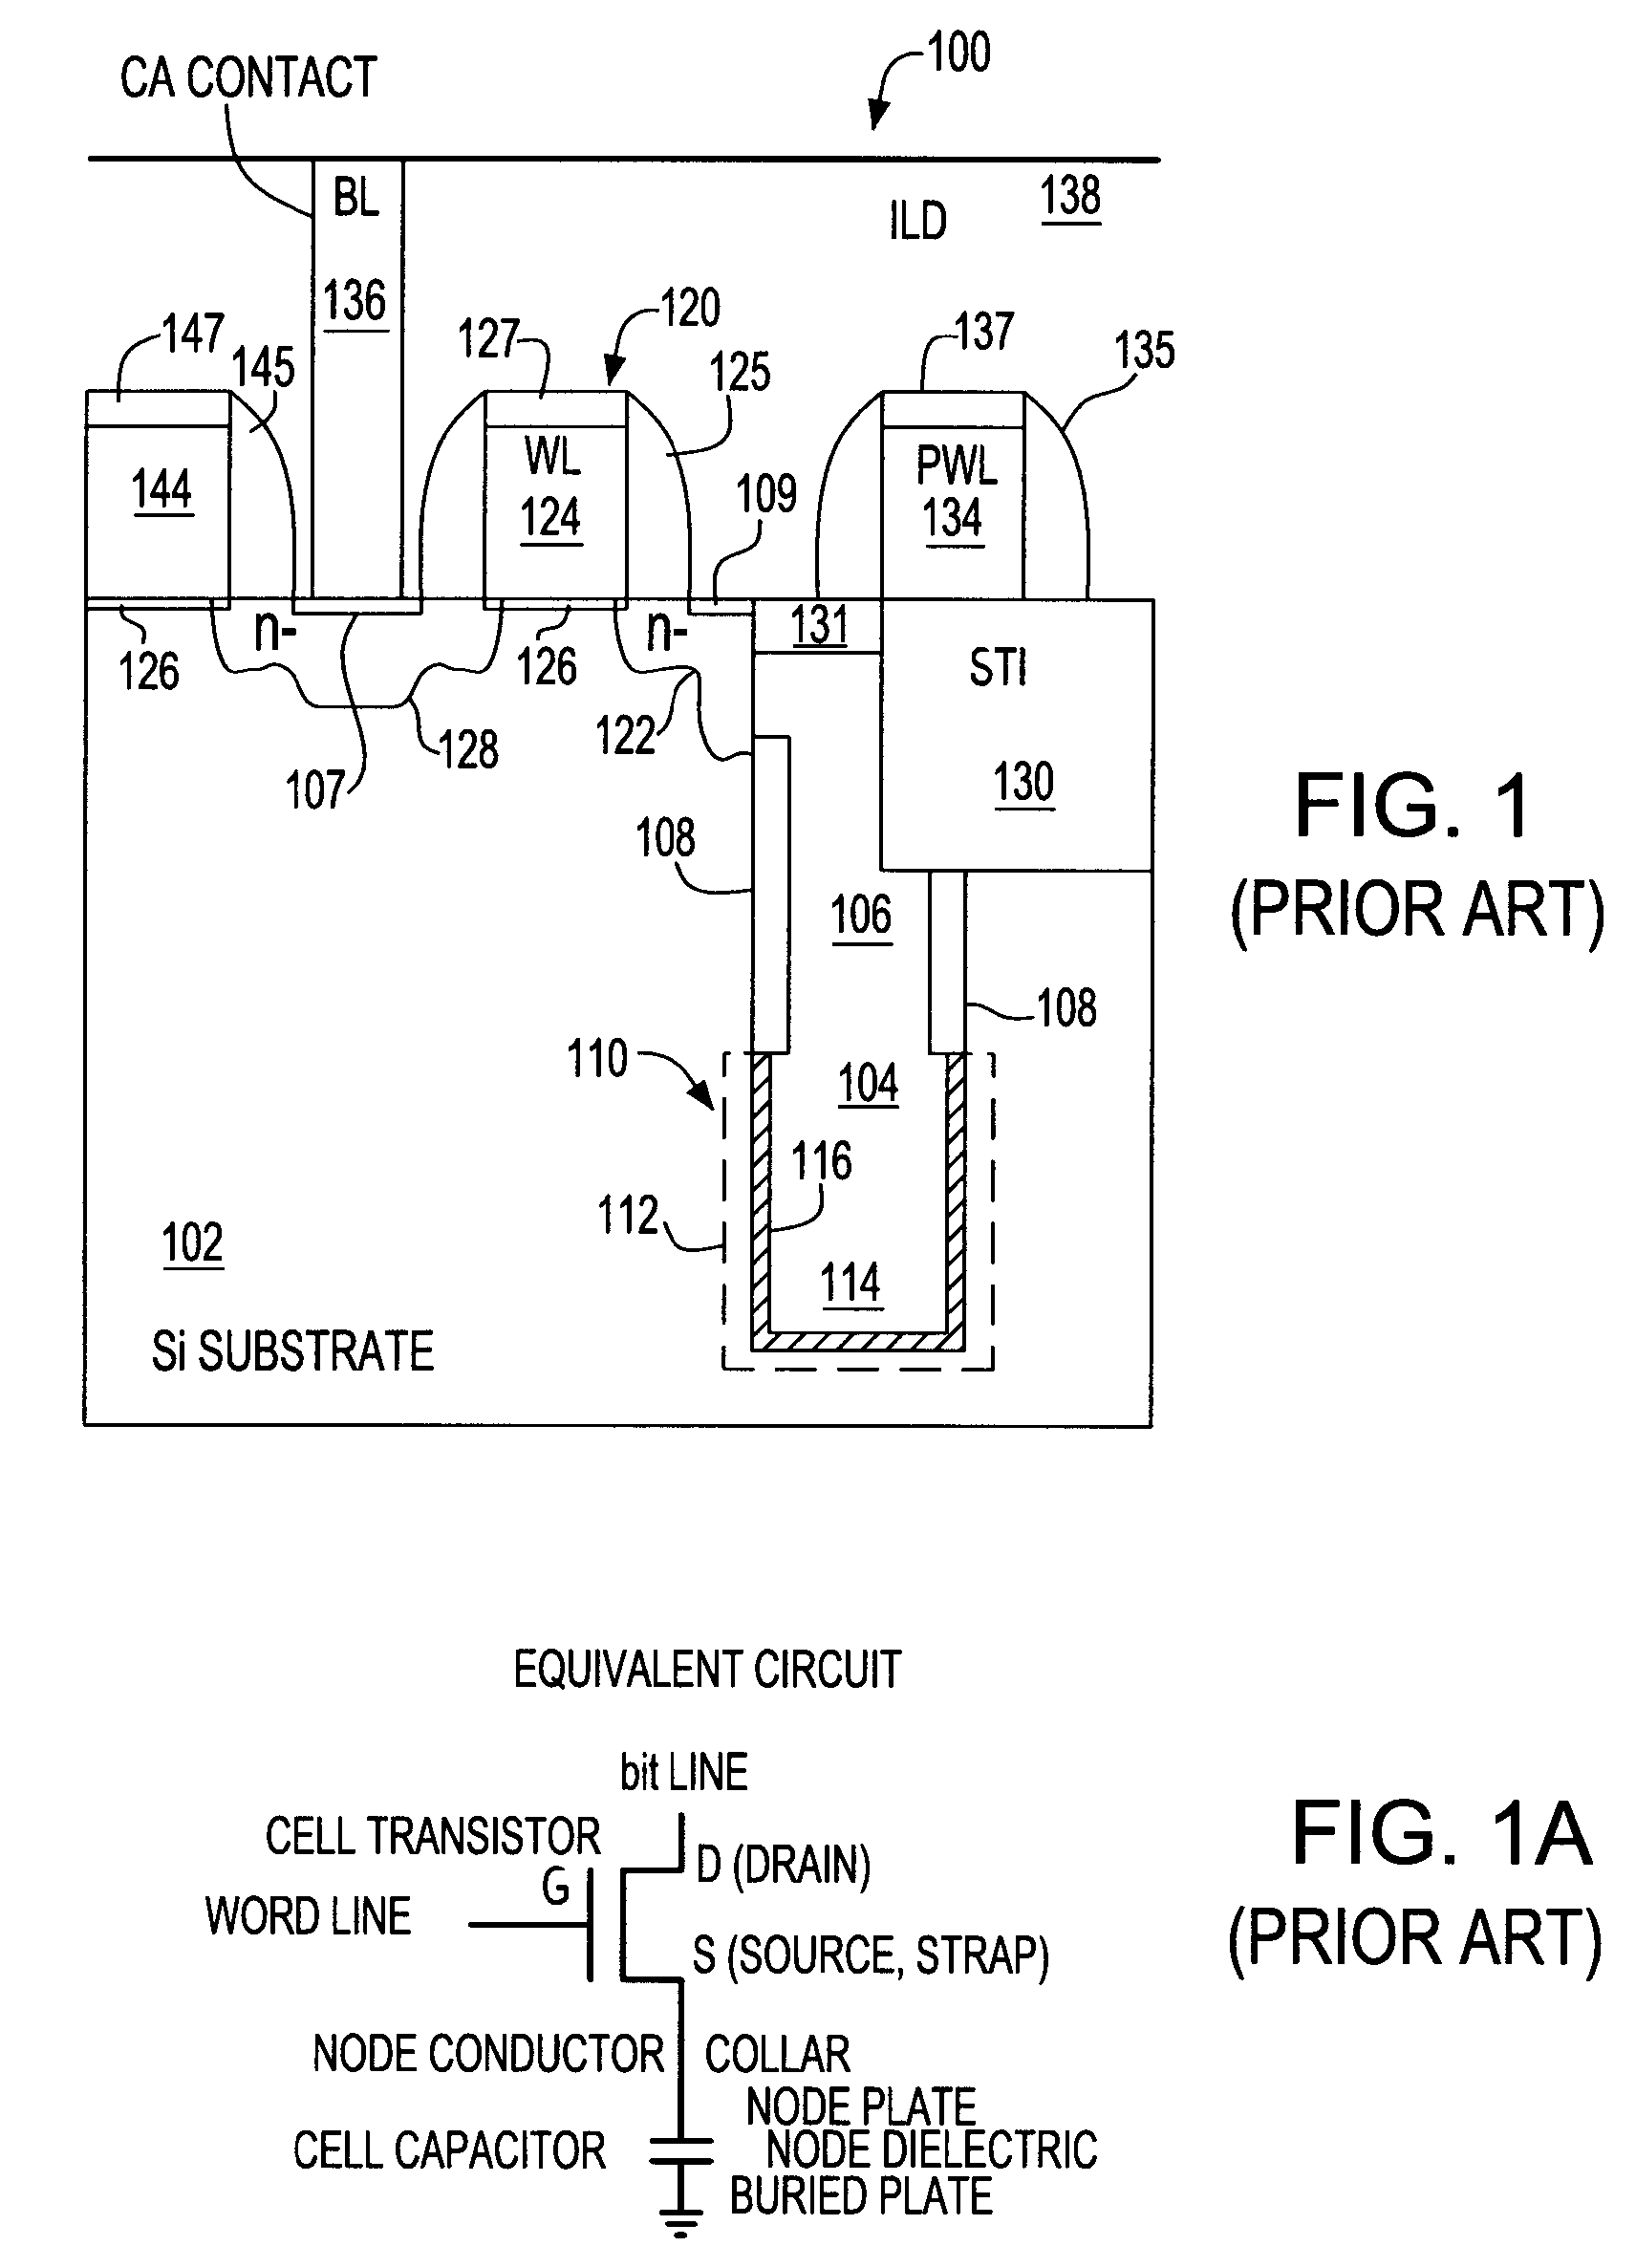 Self-aligned, silicided, trench-based, DRAM/EDRAM processes with improved retention